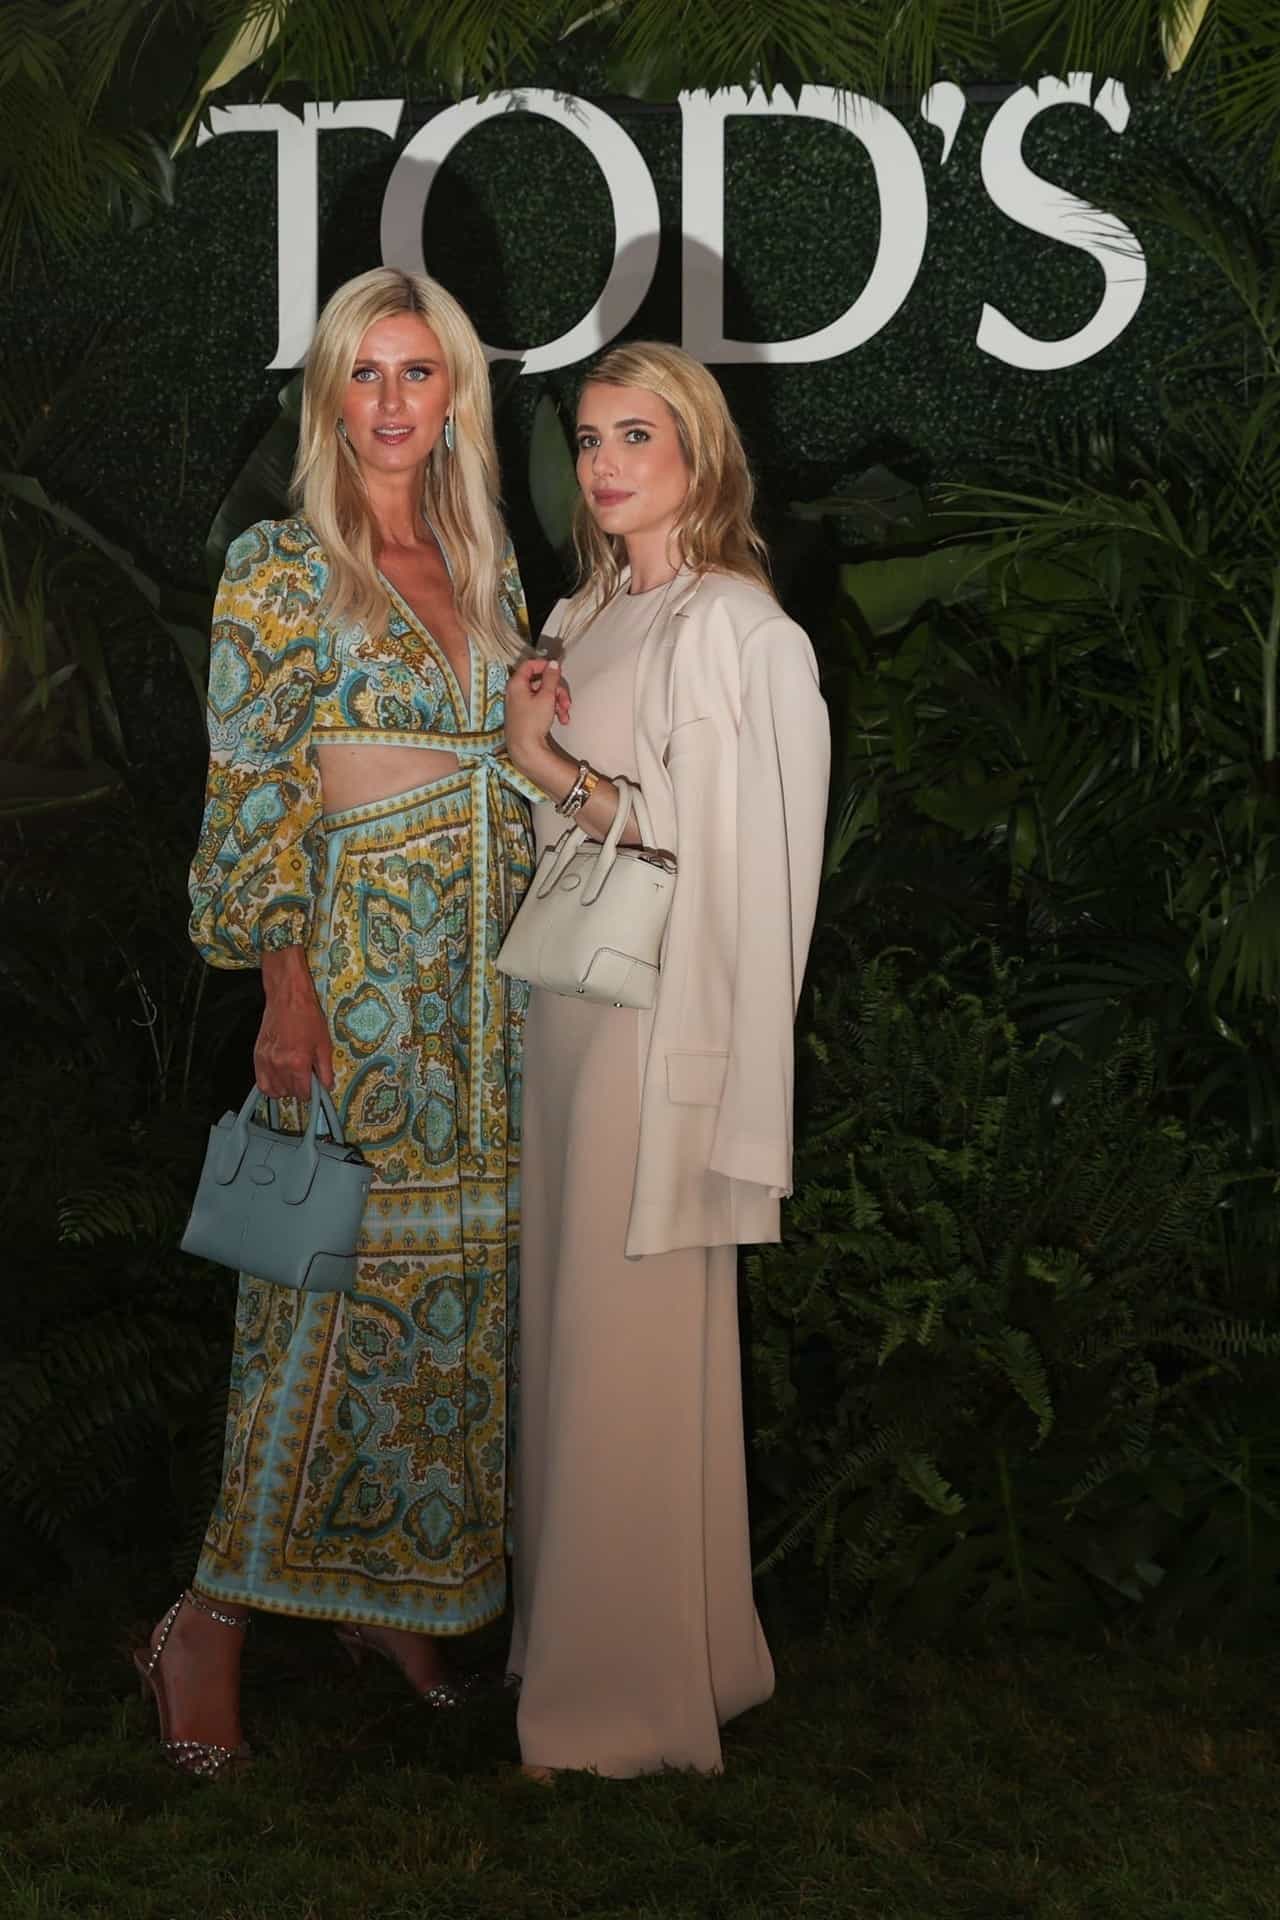 Emma Roberts Embraces Summer in Chic Maxi Dress at Tod's Hampton Event